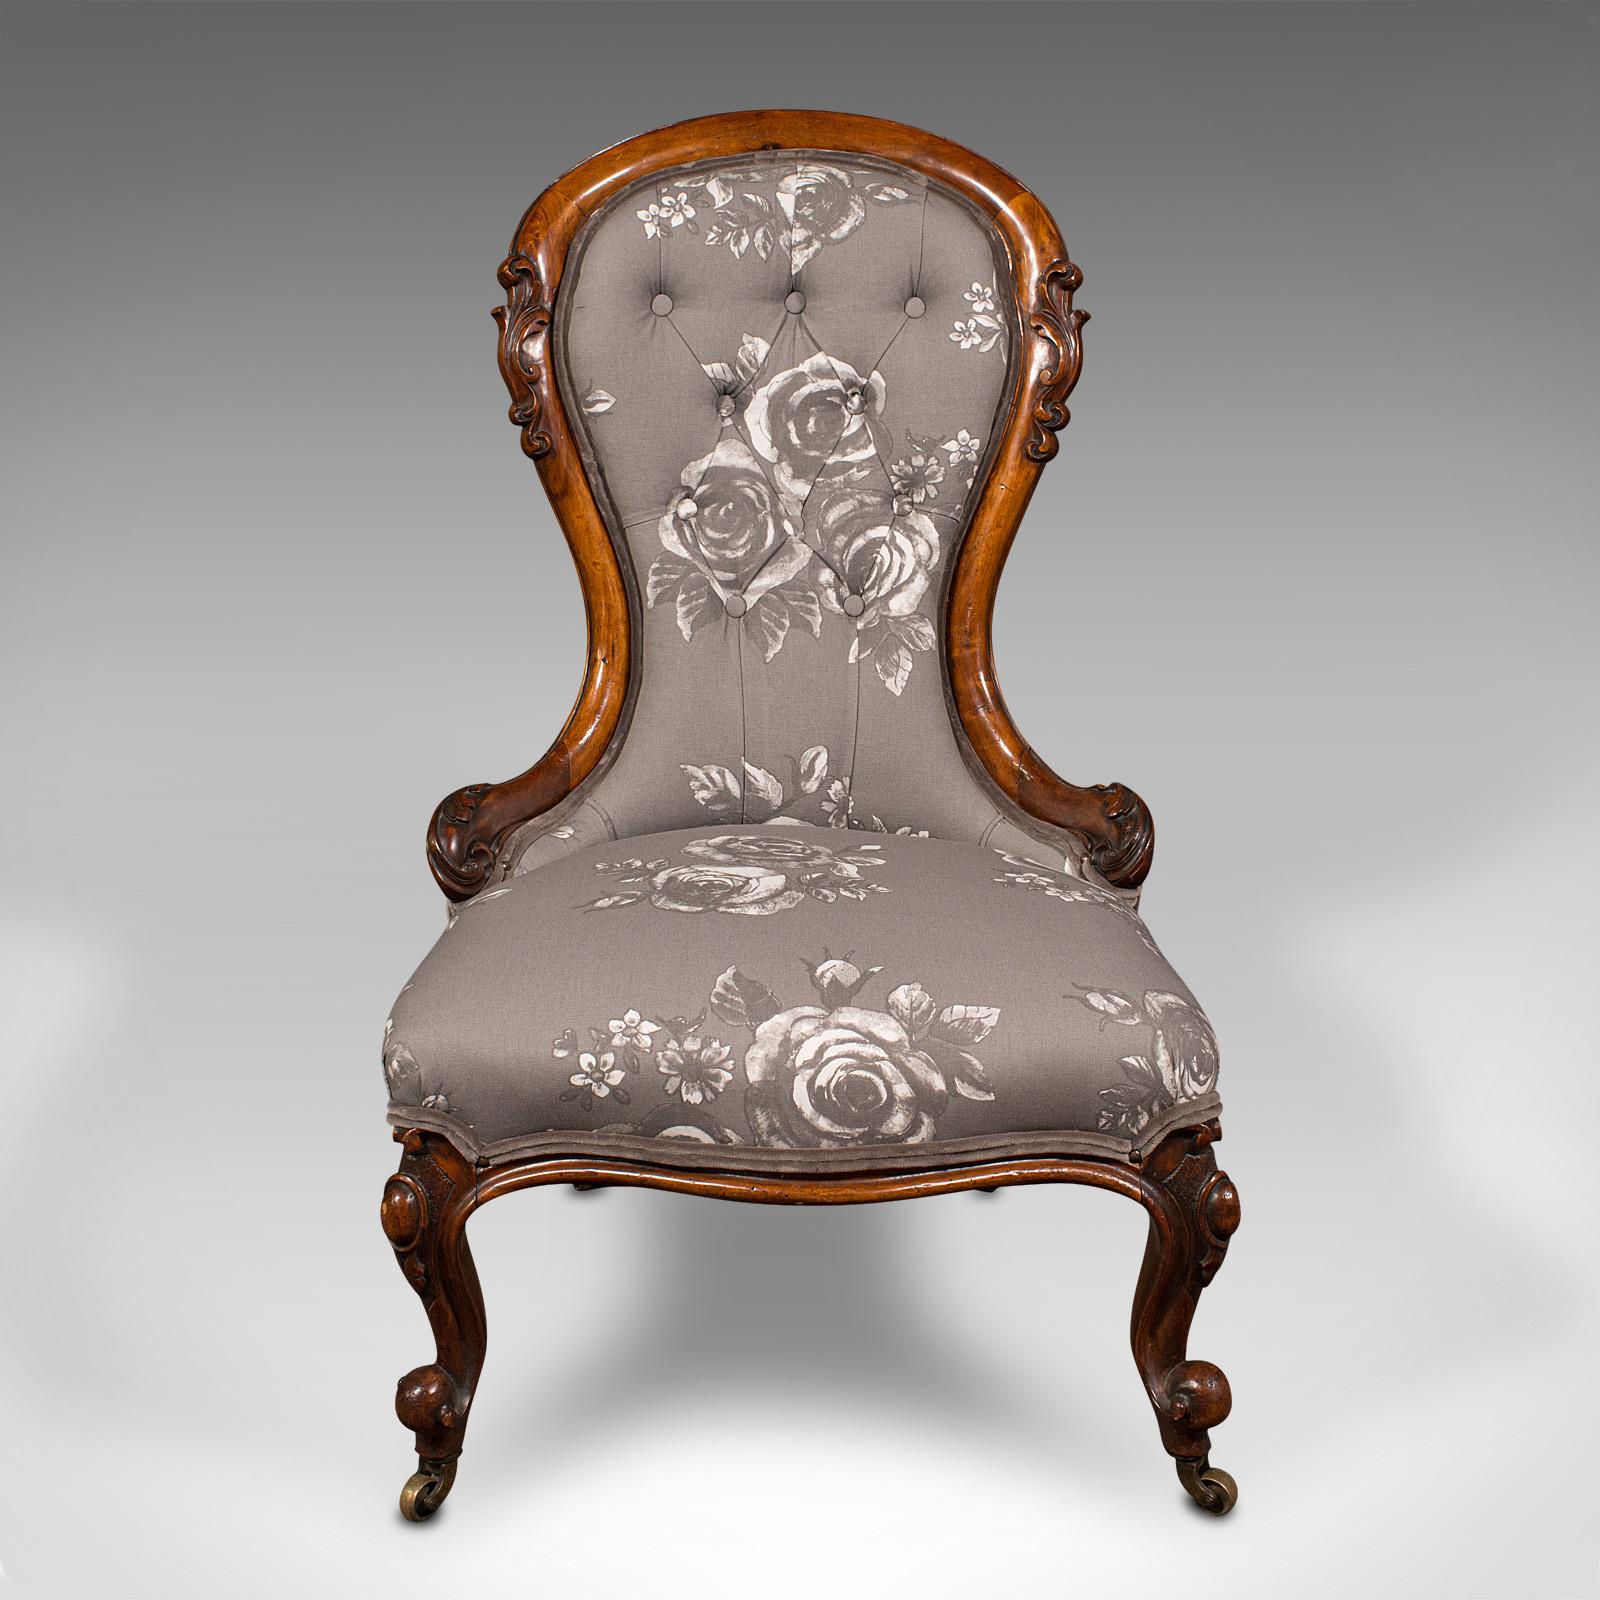 This is an antique button-back salon chair. An English, walnut spoon-back seat, dating to the early Victorian period, circa 1840.

Beautifully presented with exceptional quality and form
Displays a desirable aged patina and in good order
Walnut